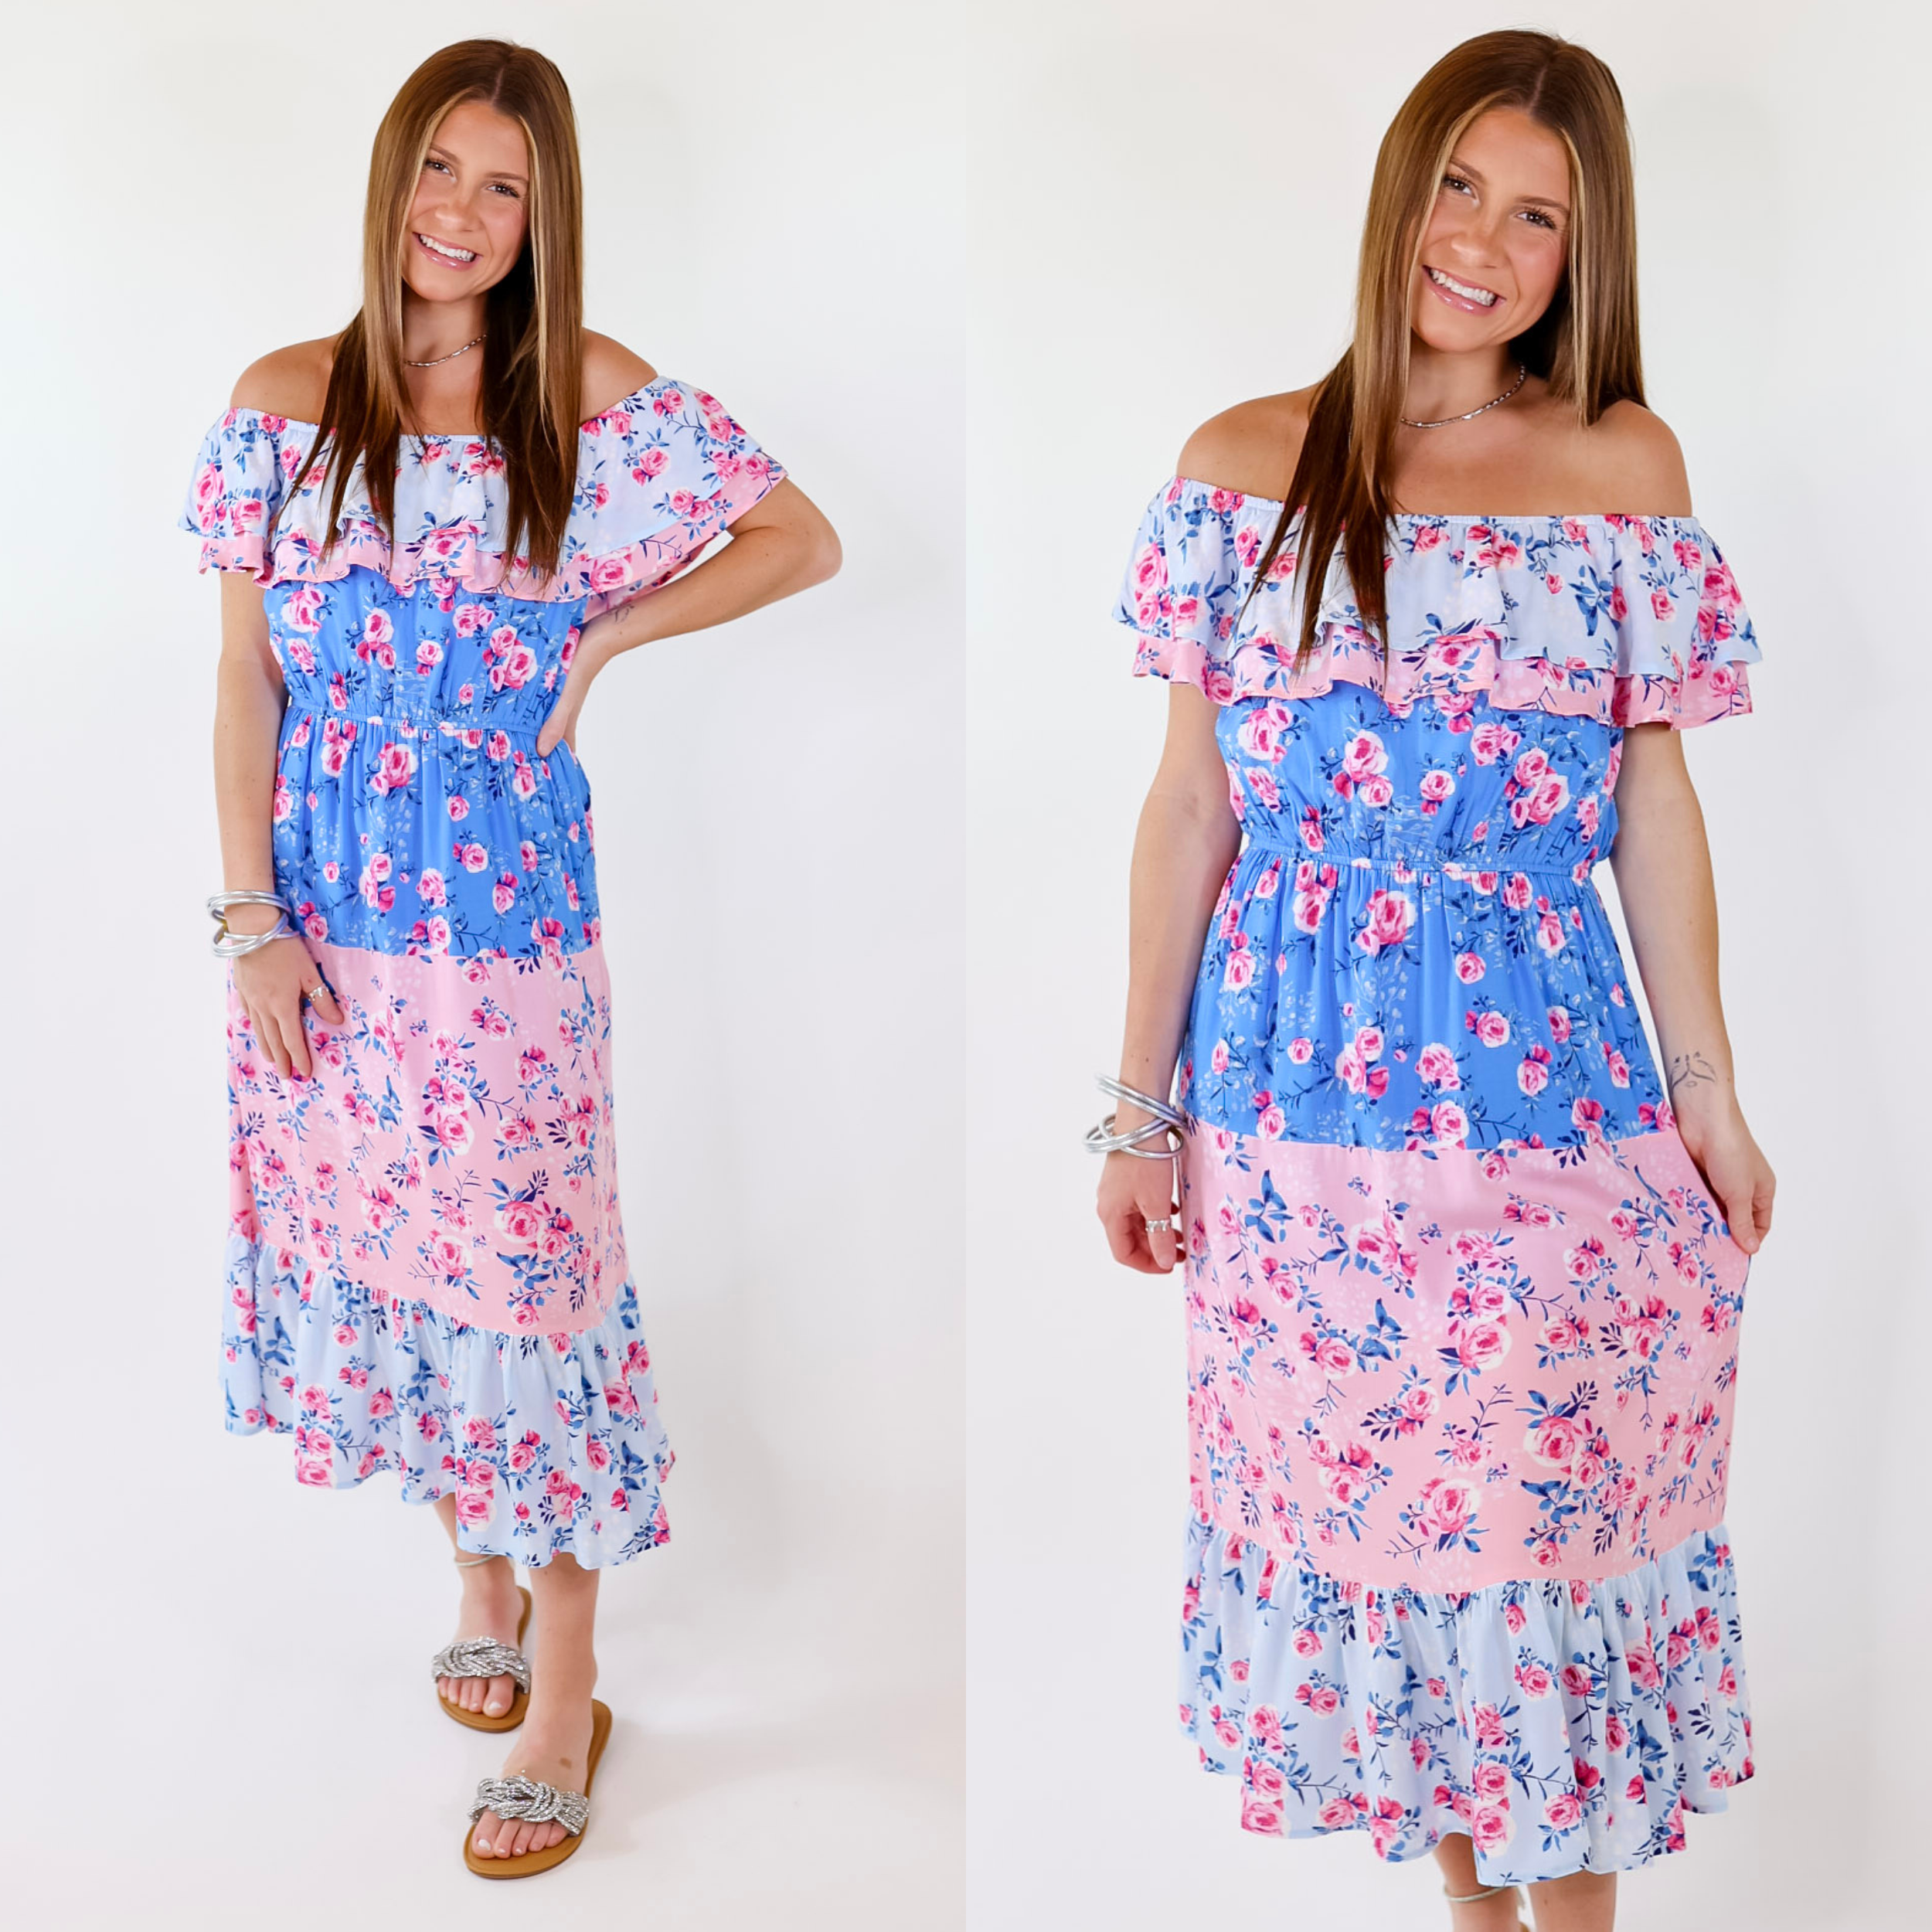 Model is wearing a pink and blue floral print midi dress with ruffle shoulders.